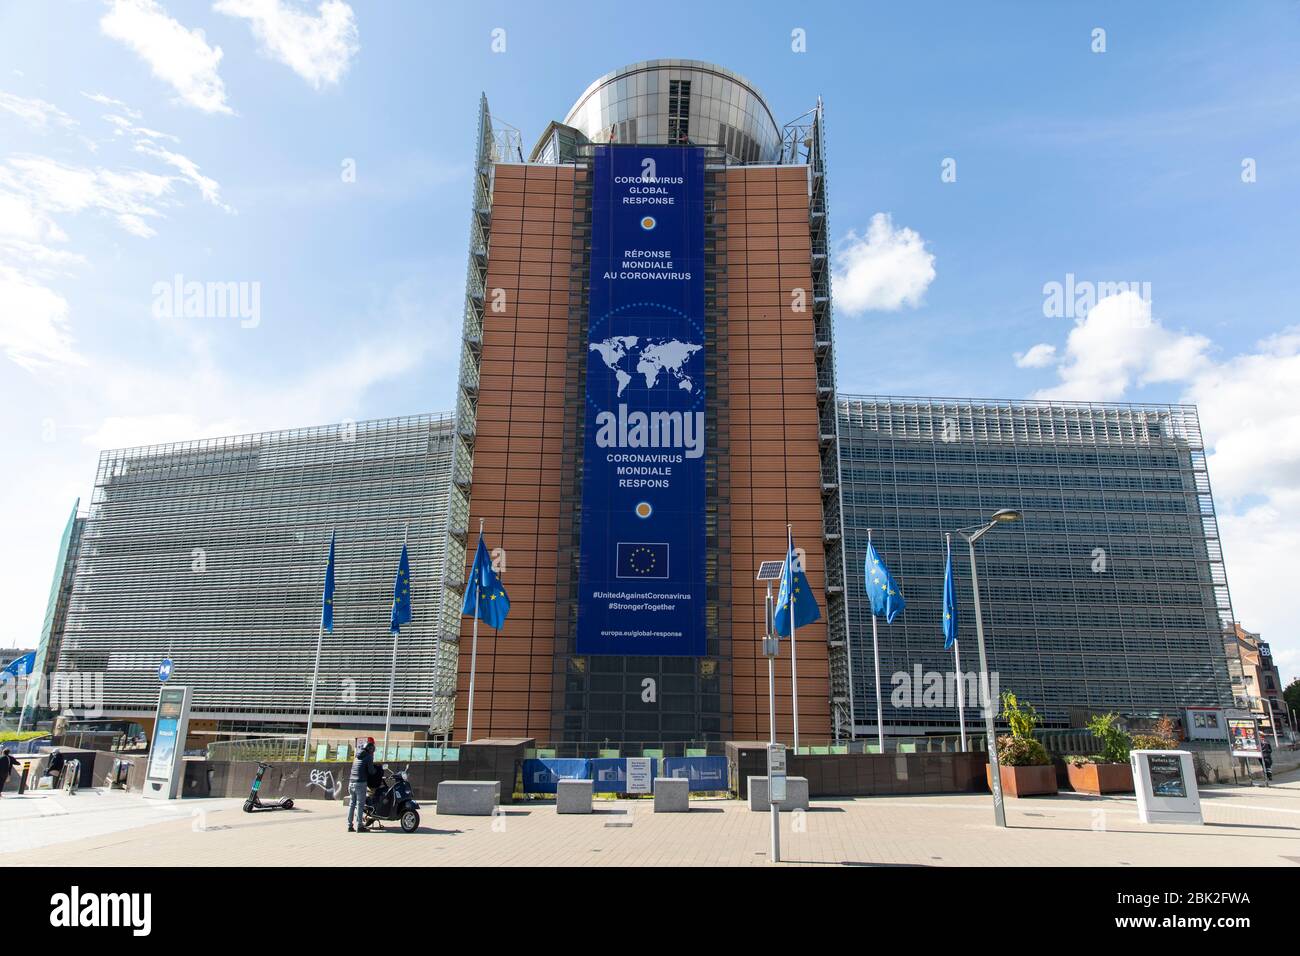 BRUSSELS, Belgium - fourth of may 2020 : The 'Coronavirus - Global Response' banner displayed on the front of the Berlaymont building, the headquarter Stock Photo